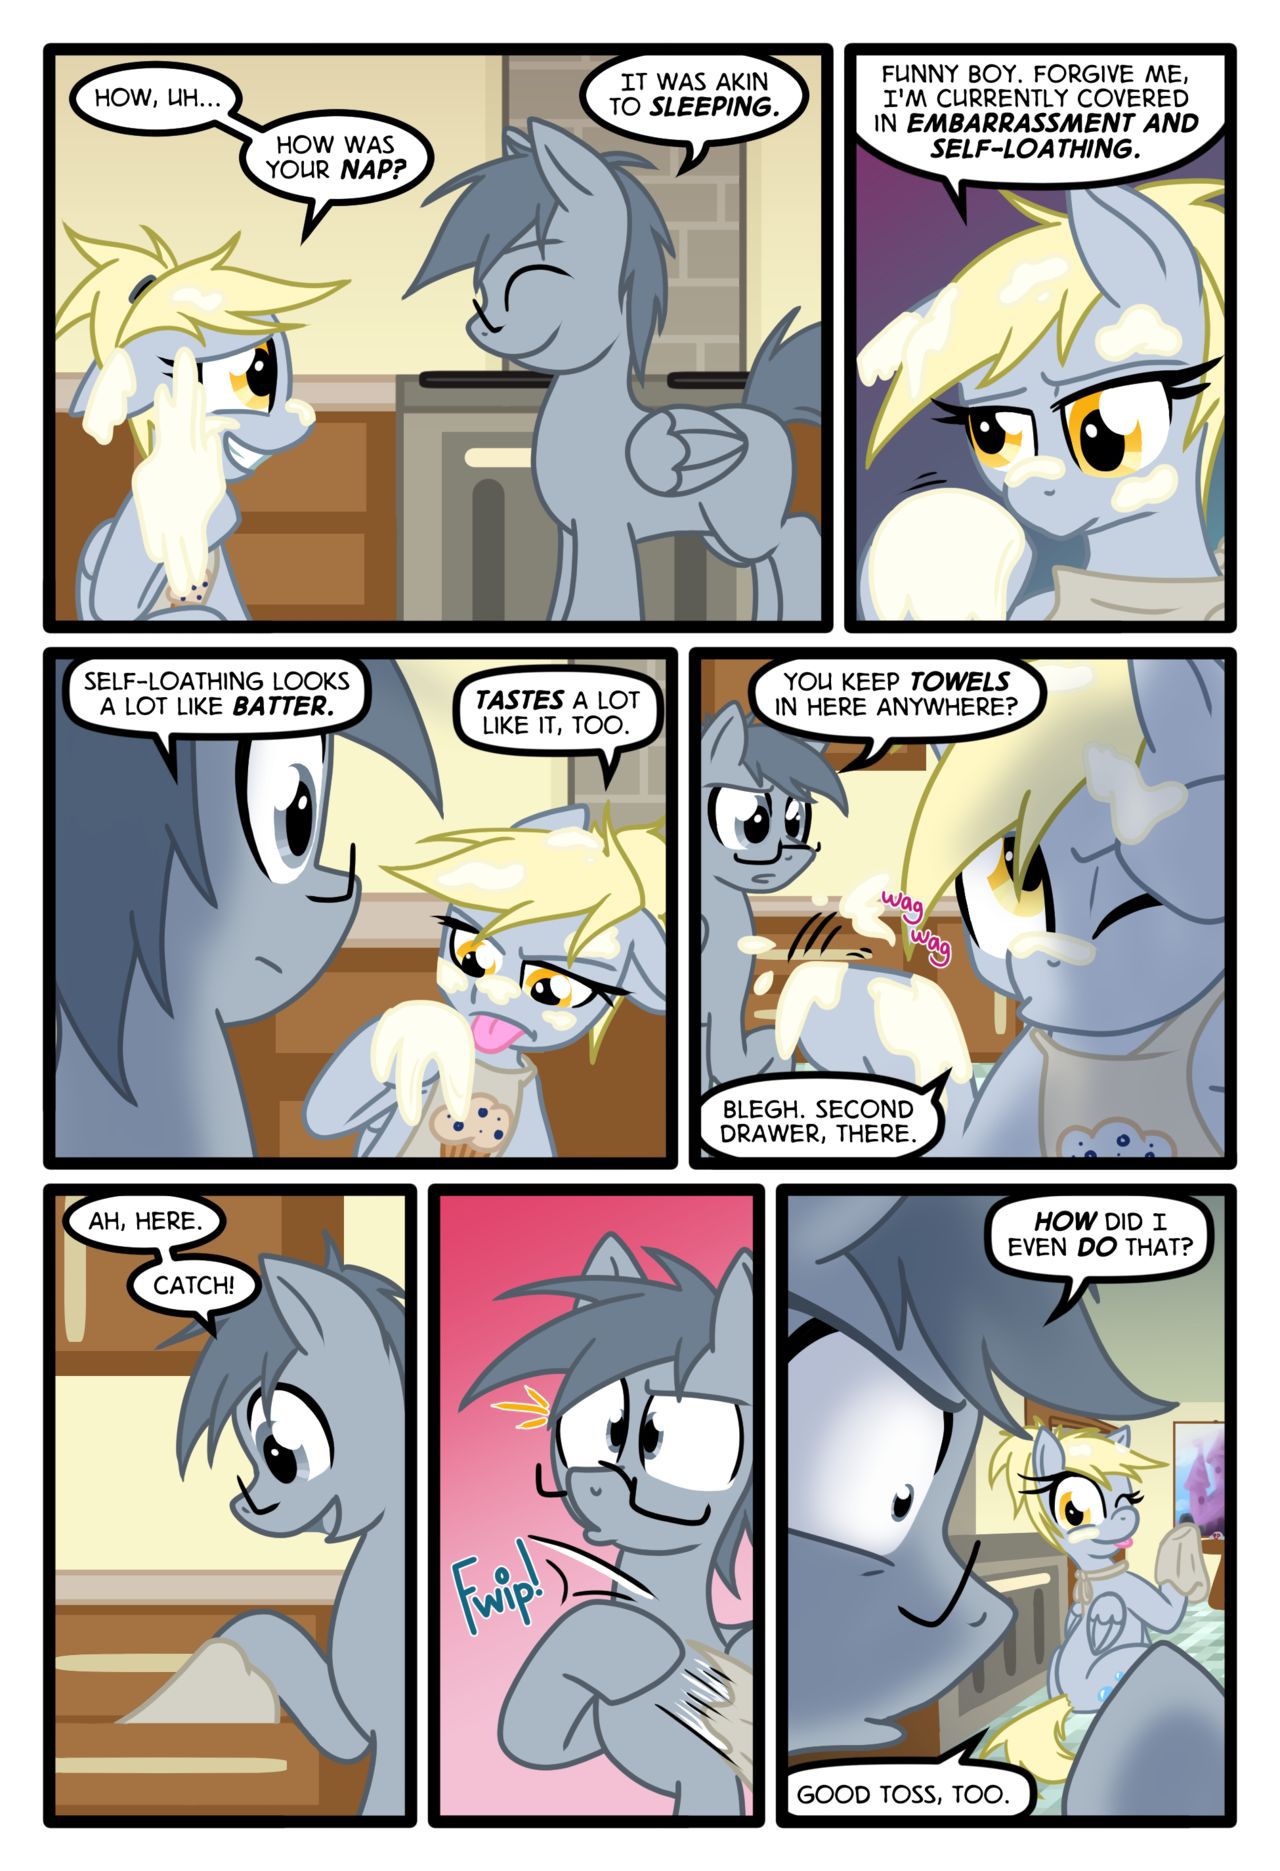 [Zaron] Lonely Hooves (My Little Pony Friendship Is Magic) [Ongoing] 78